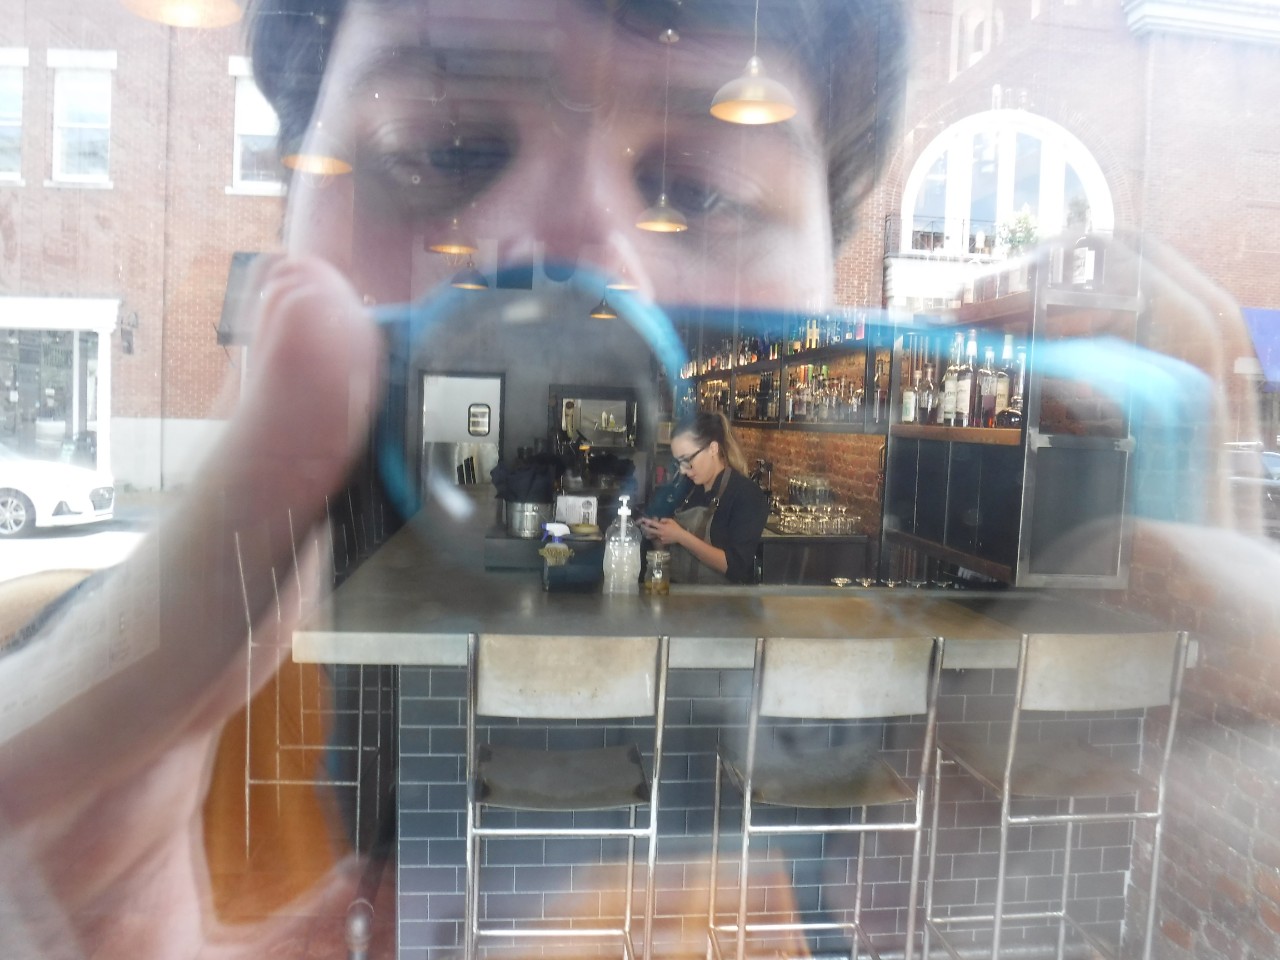 This photo shows the reflection of a white young man taking a photo with a camera in the window of a coffee shop. In the center of the photo there is a barista at the coffee counter preparing a drink but around the image of what is inside the shop is the photographer’s reflection while he is concentrating on taking the digital photo.